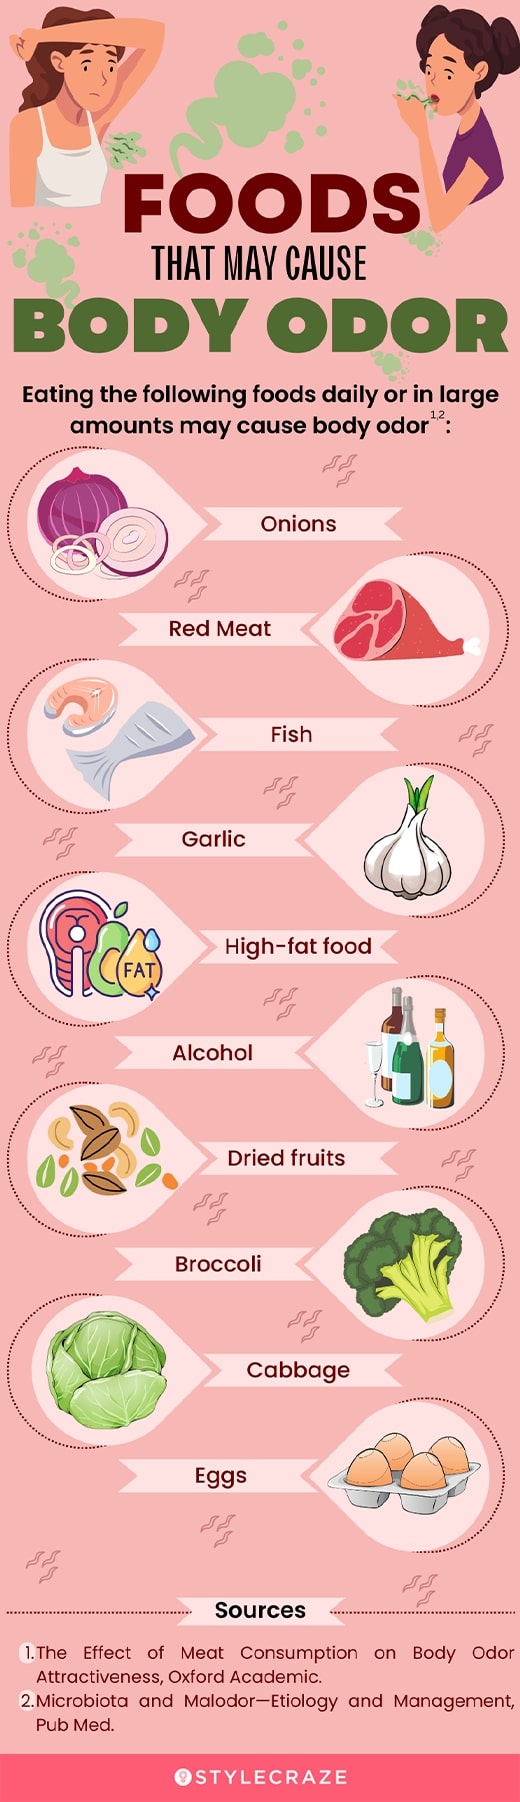 foods that may cause body odor (infographic)